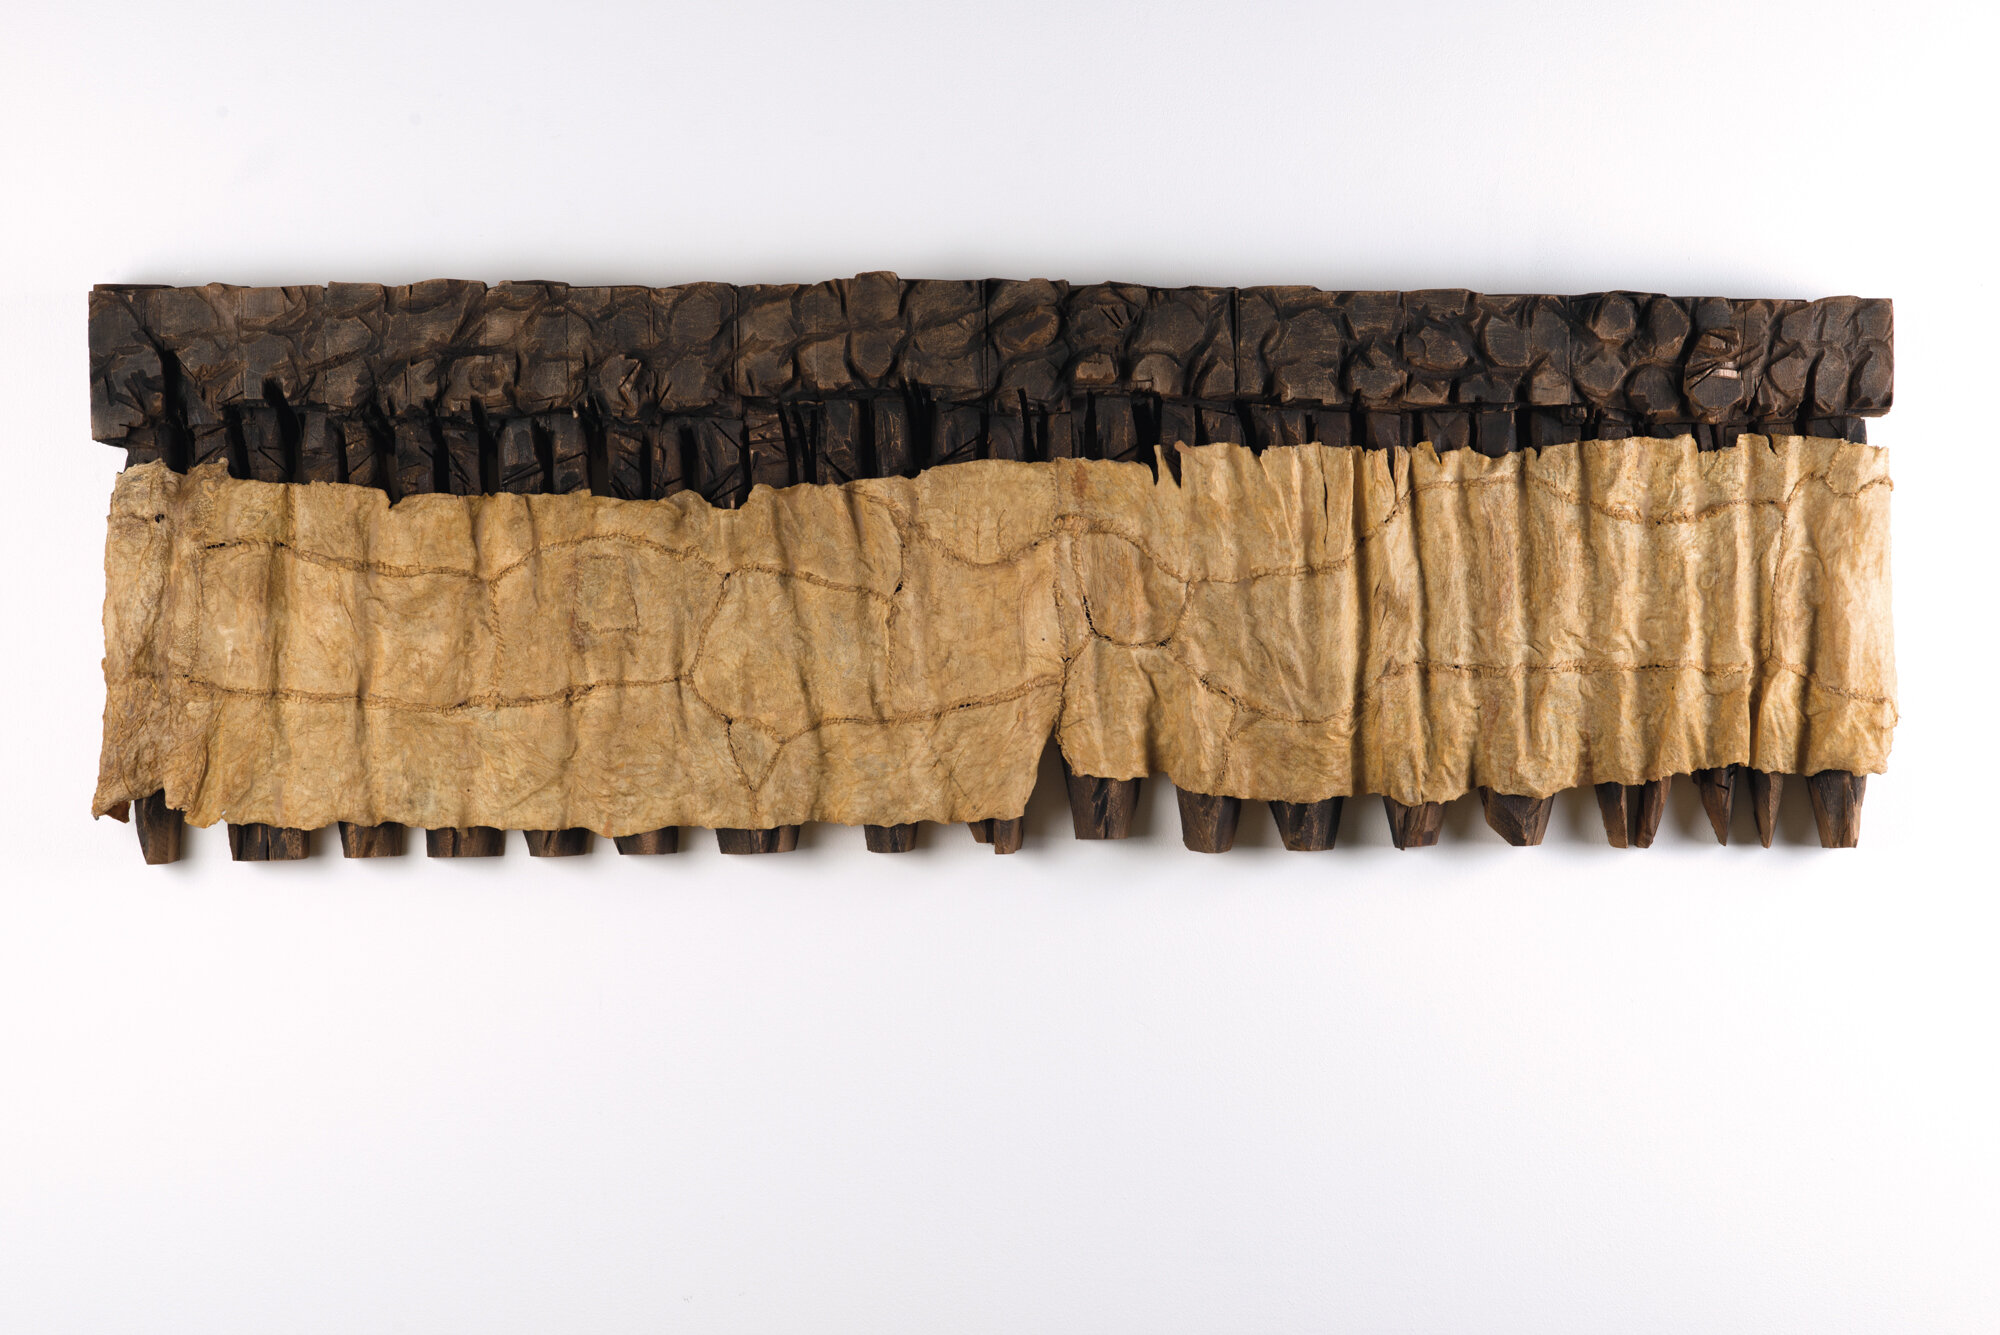       Comb with Bulbs , 1995-96 Cedar, graphite, and cow intestines 23.25 x 76.75 x 5 in.    Yorkshire Sculpture Park  